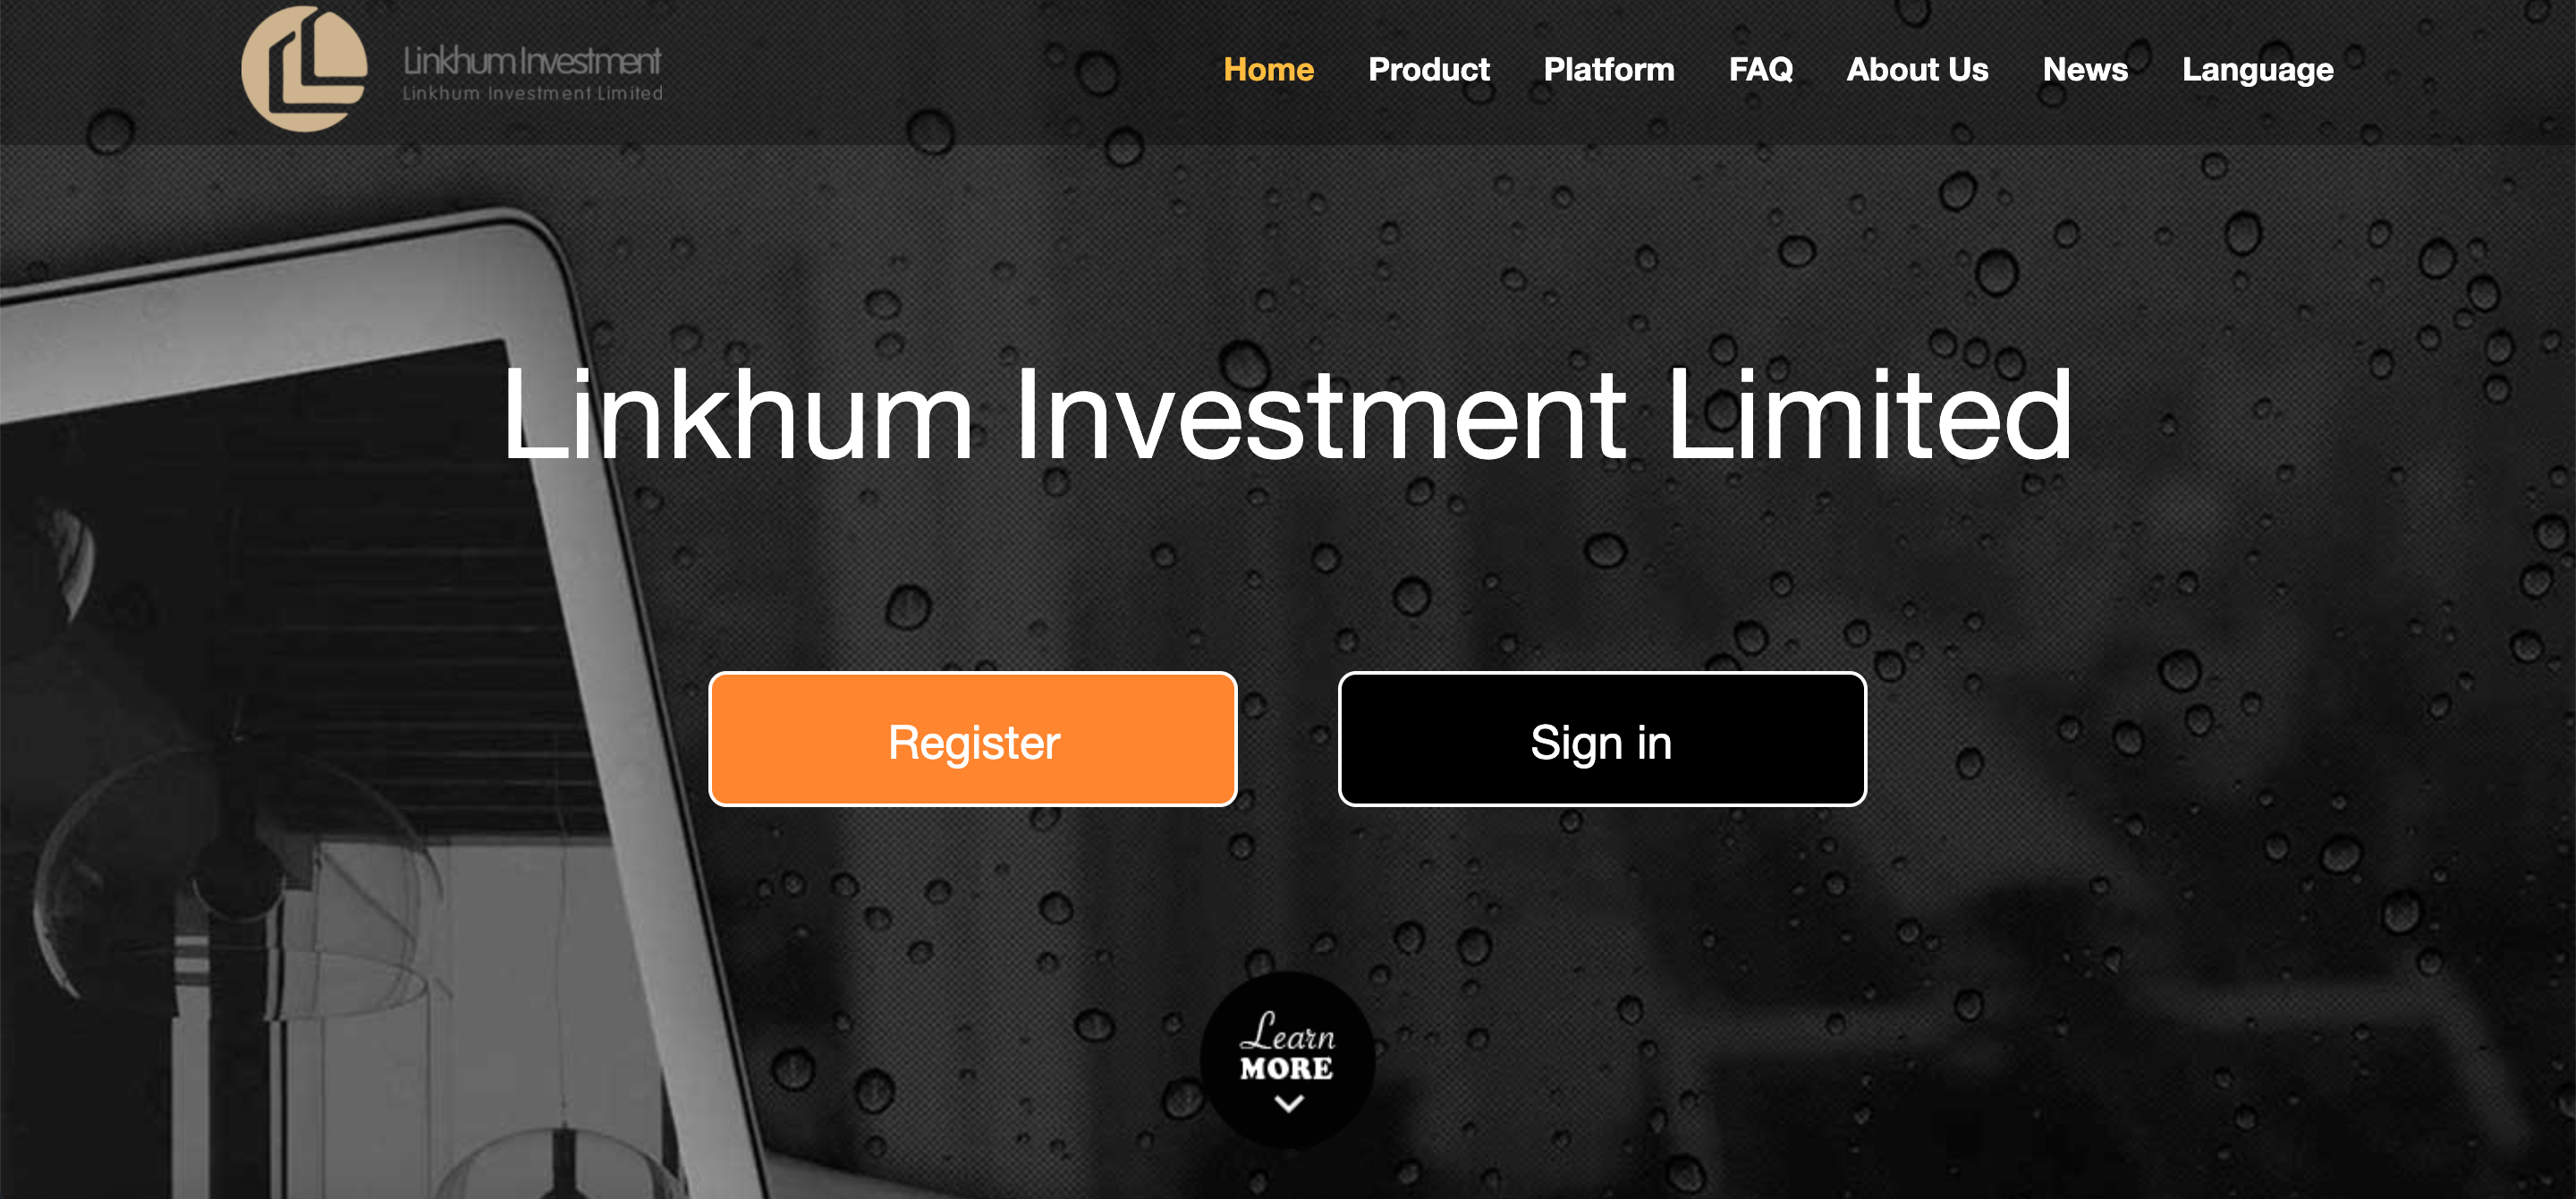 Linkhum Investment Limited website